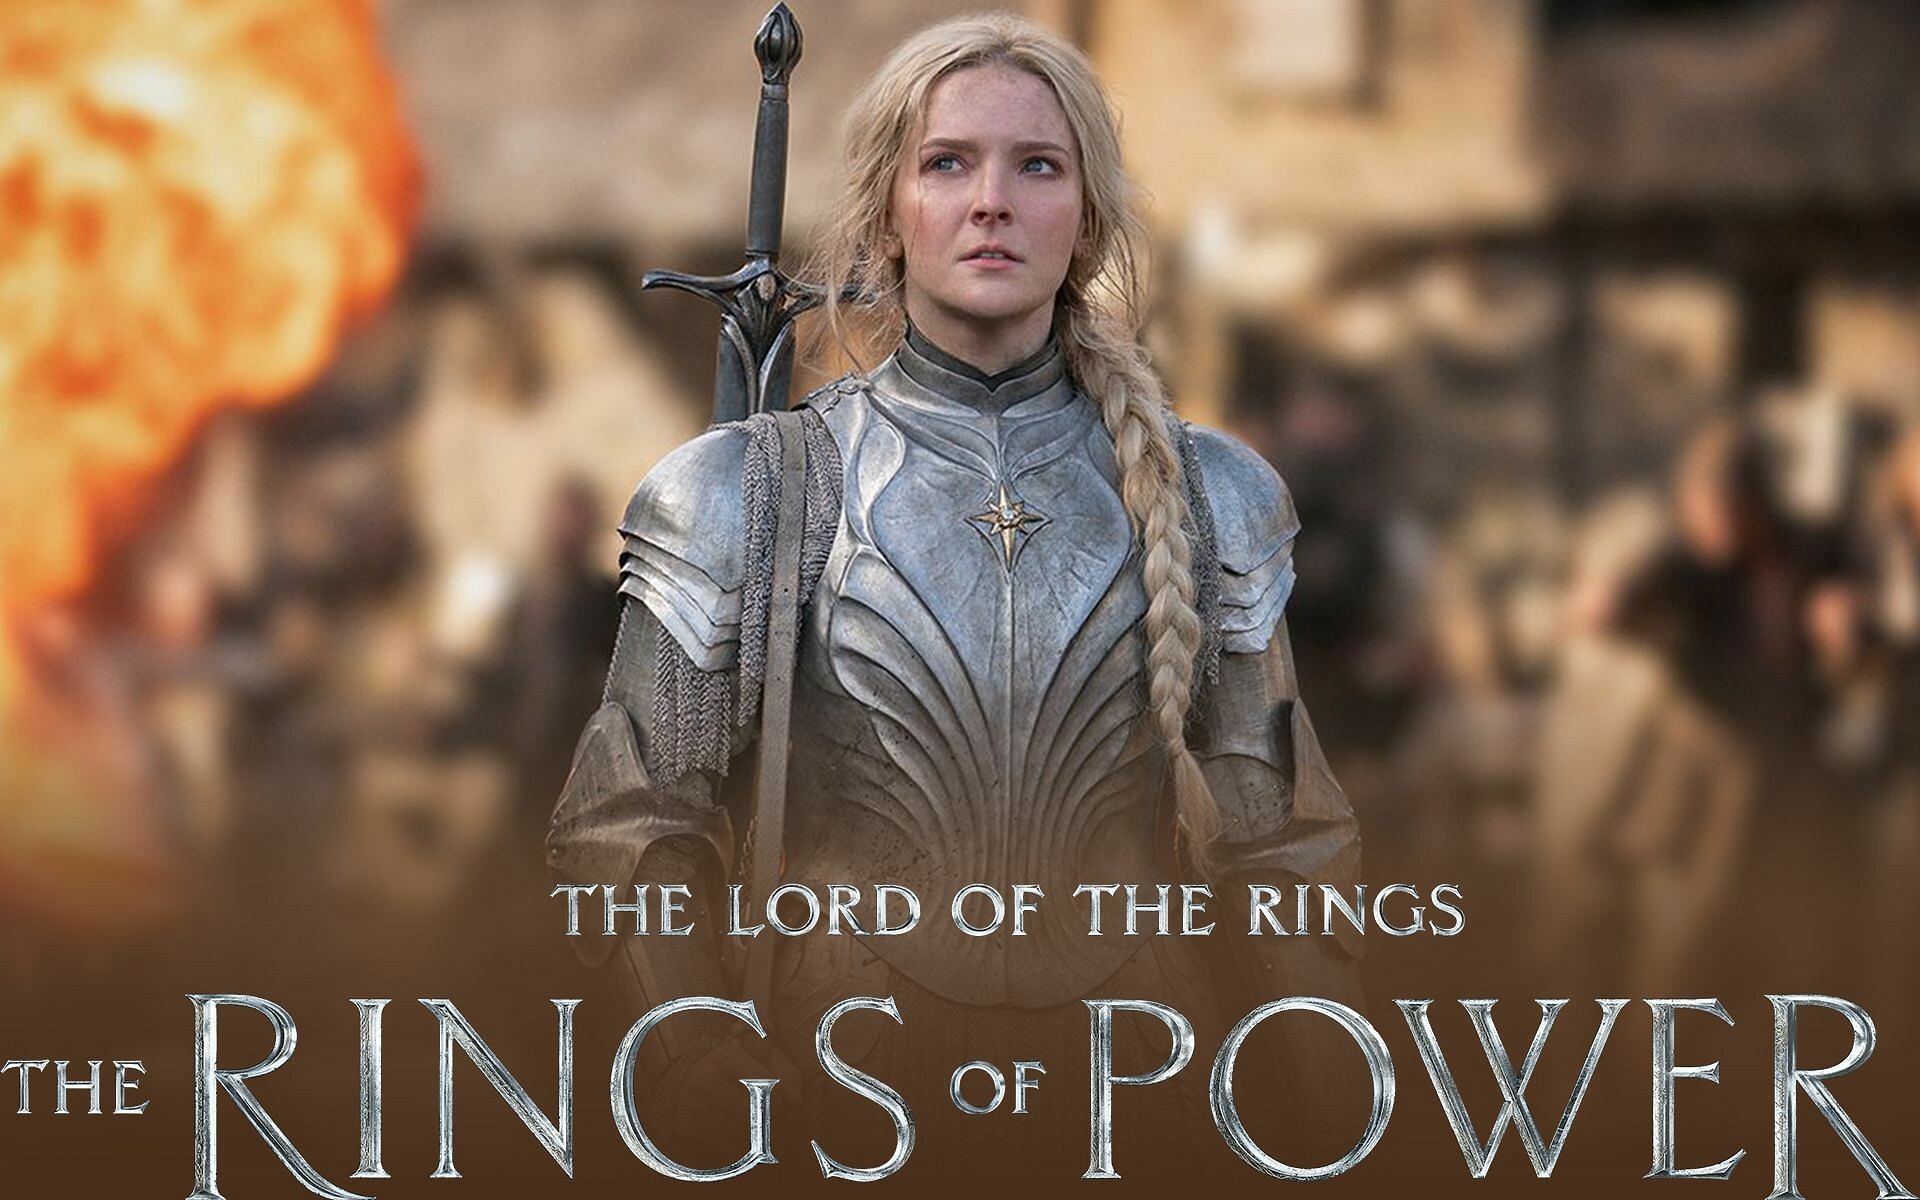 The Lord of the Rings: The Rings of Power, TV Shows, Corporate fanfiction, Epic fantasy, 1920x1200 HD Desktop